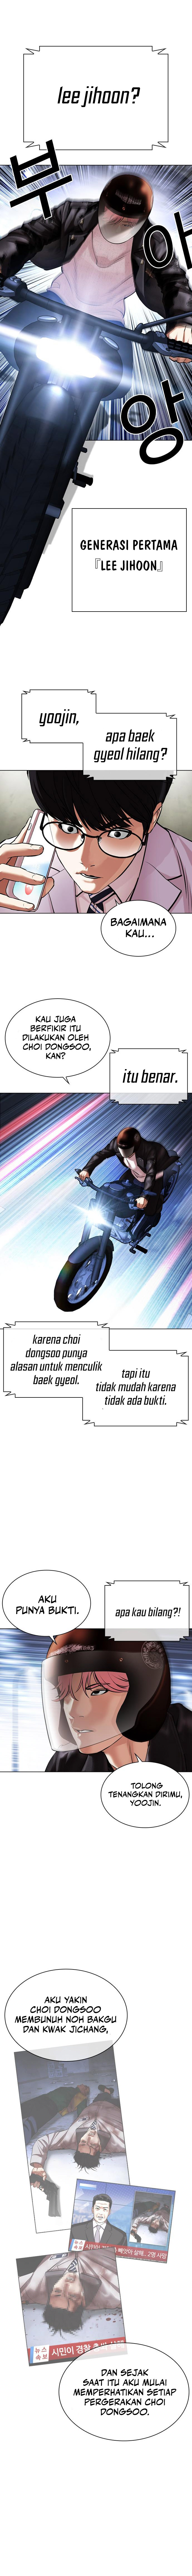 Lookism Chapter 480 Image 21